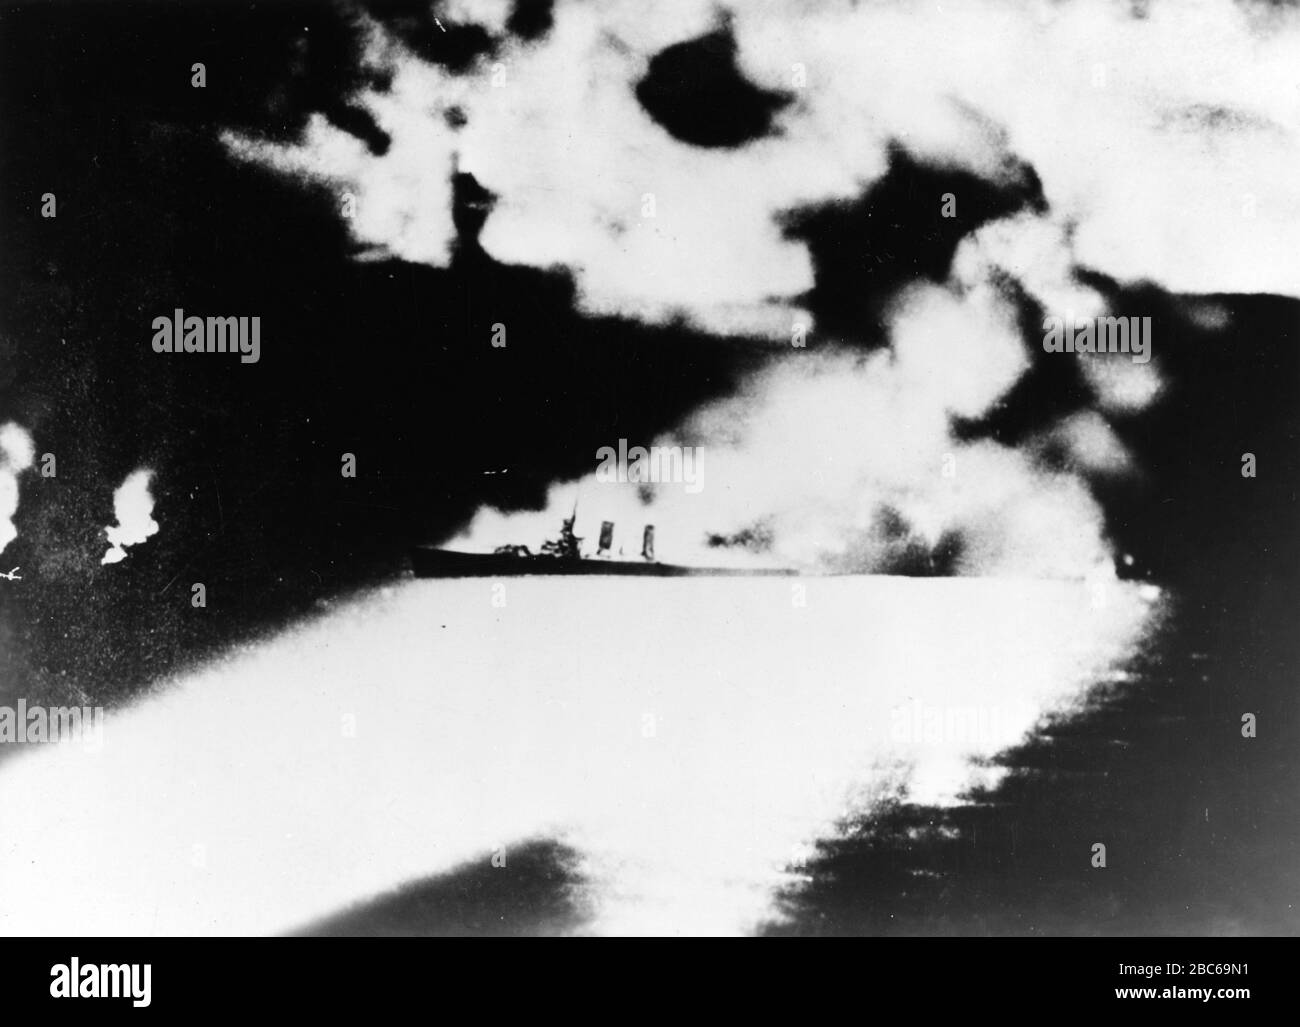 'The U.S. Navy heavy cruiser USS Quincy (CA-39) photographed from a Japanese cruiser during the Battle of Savo Island, off Guadalcanal, 9 August 1942. Quincy, seen here burning and illuminated by Japanese searchlights, was sunk in this action.The flames at the far left of the picture are probably from the USS Vincennes (CA-44), also on fire from gunfire and torpedo damage.; 9 August 1942; Official U.S. Navy photo NH 50346 from the U.S. Navy Naval History and Heritage Command; Imperial Japanese Navy, copied from the Rear Admiral Samuel Eliot Morison World War II history illustrations file. Orig Stock Photo